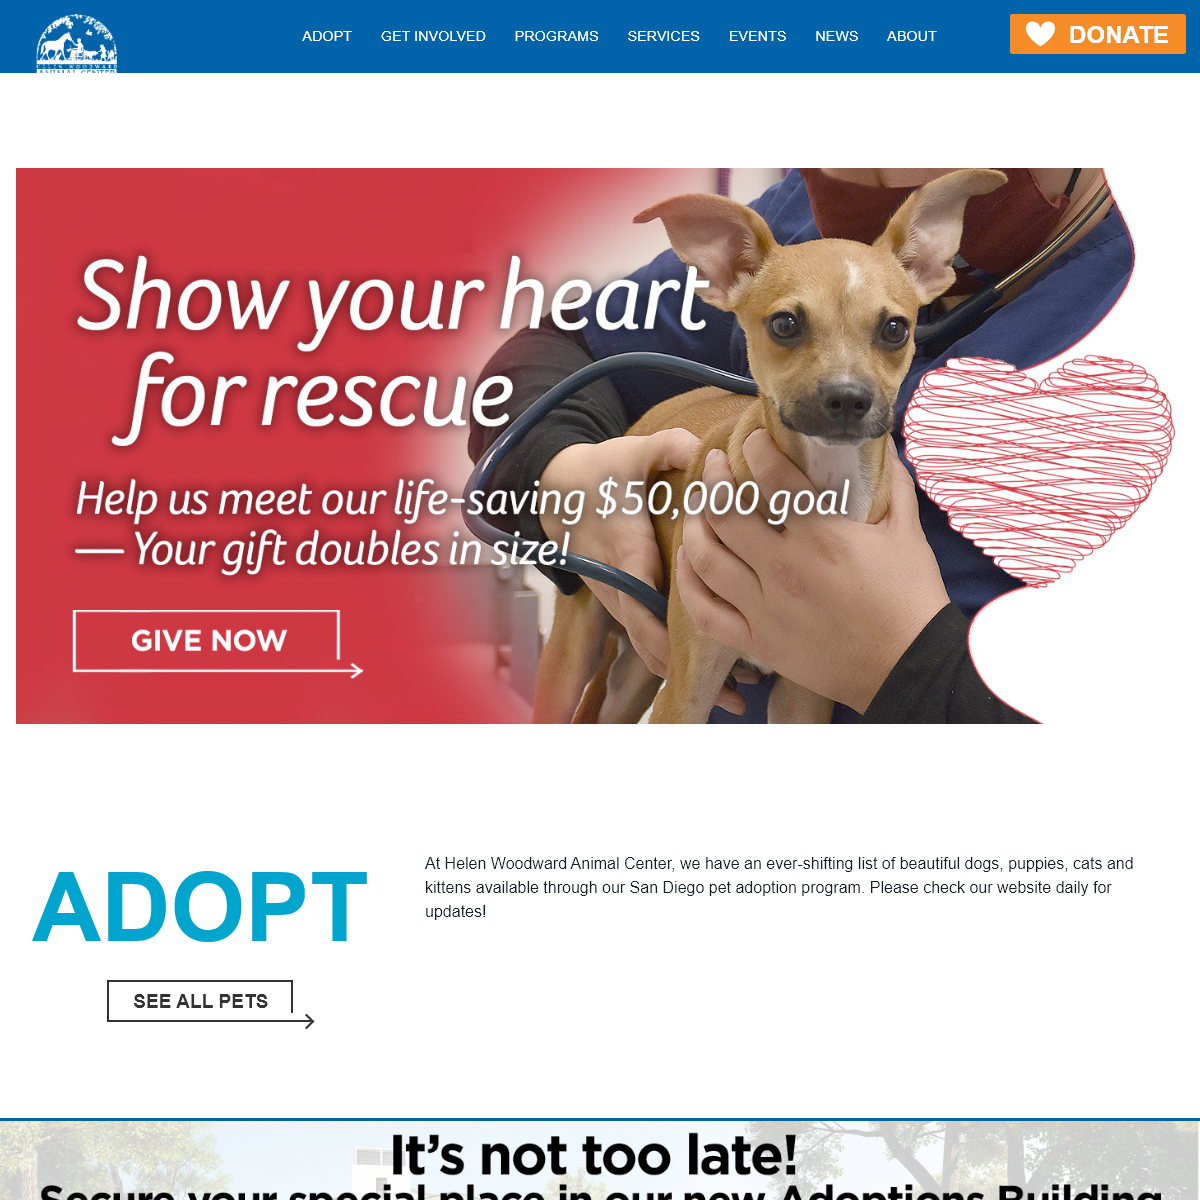 A complete backup of animalcenter.org